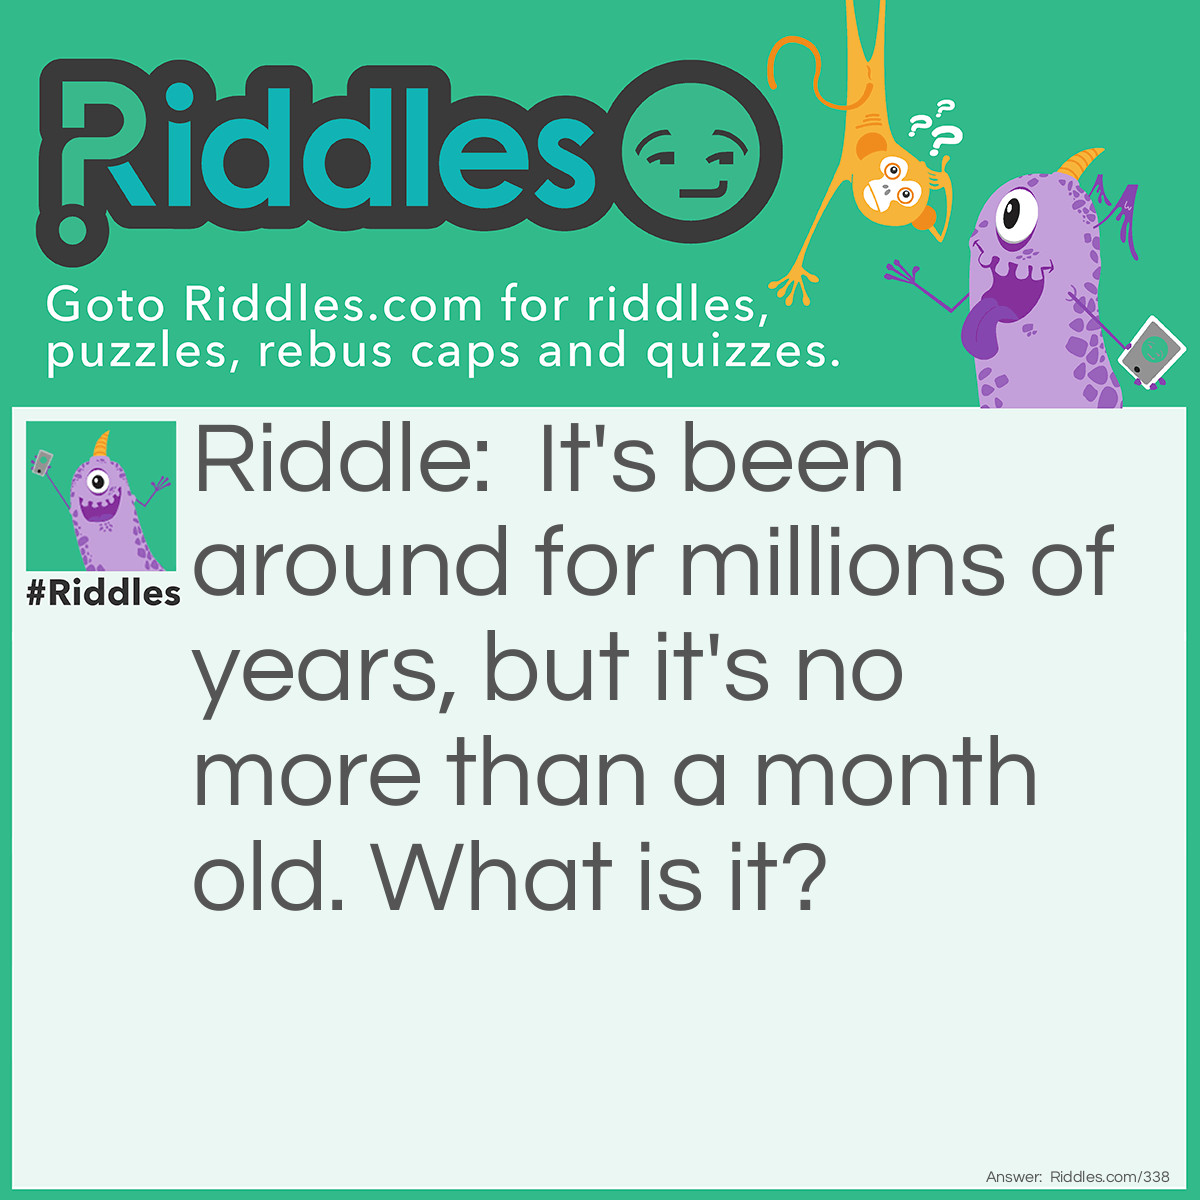 Riddle: It's been around for millions of years, but it's no more than a month old. What is it? Answer: The moon.